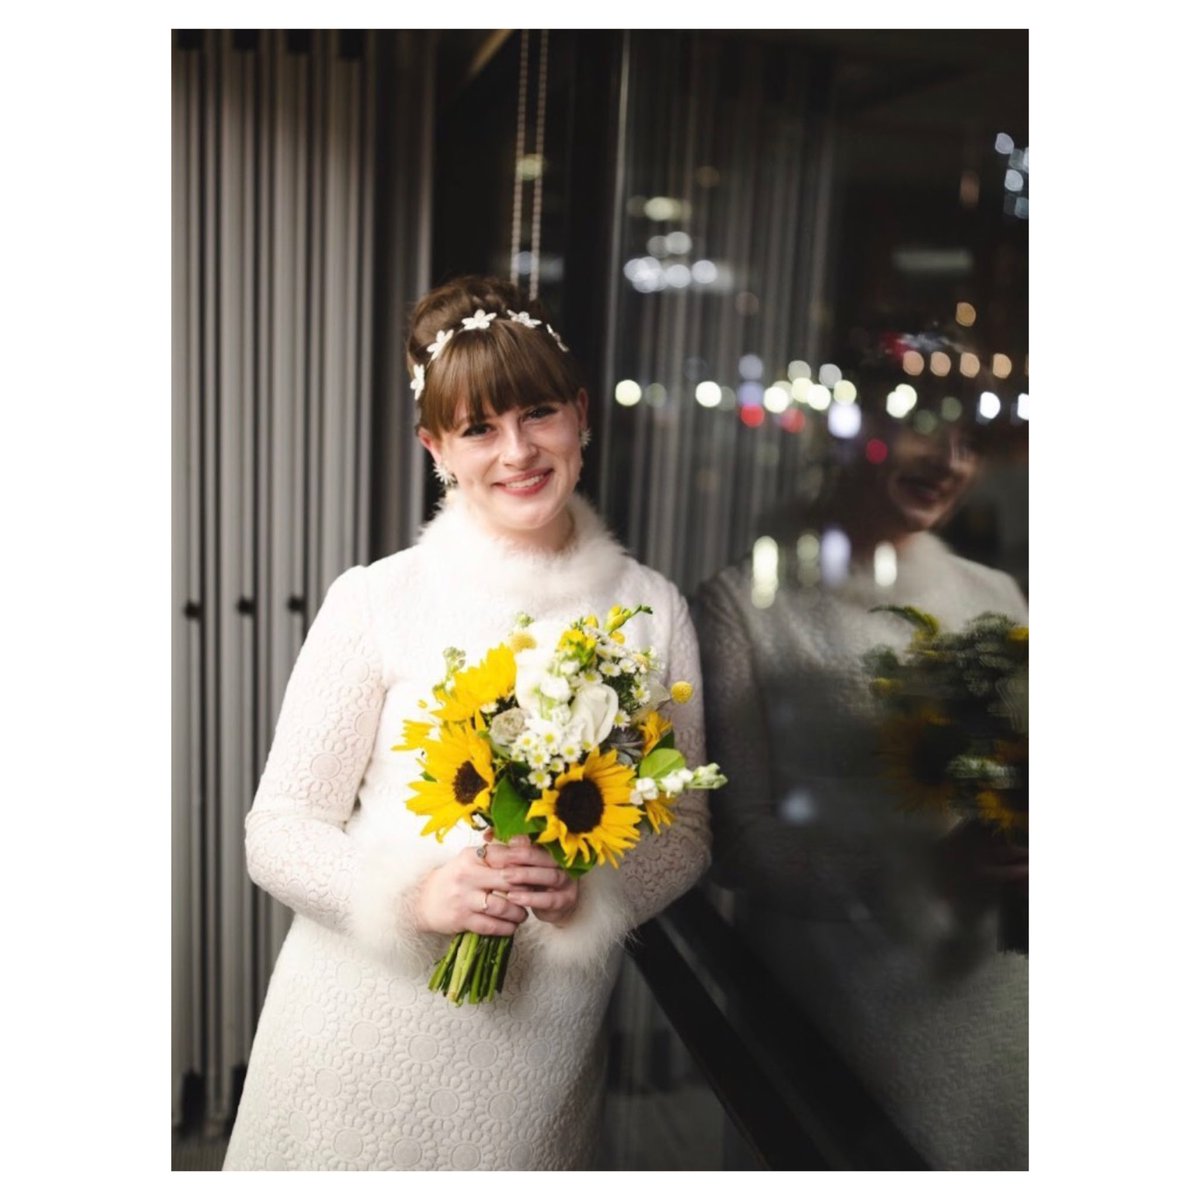 We’re so head over heels in love with our beautiful real #bride Monica’s #bridal look! She fully channeled the 60s styling vibes in her rare 1960s marabou trimmed dress for her #wedding at the New England Aquarium in Boston and she looks gorgeous ❤️❤️❤️